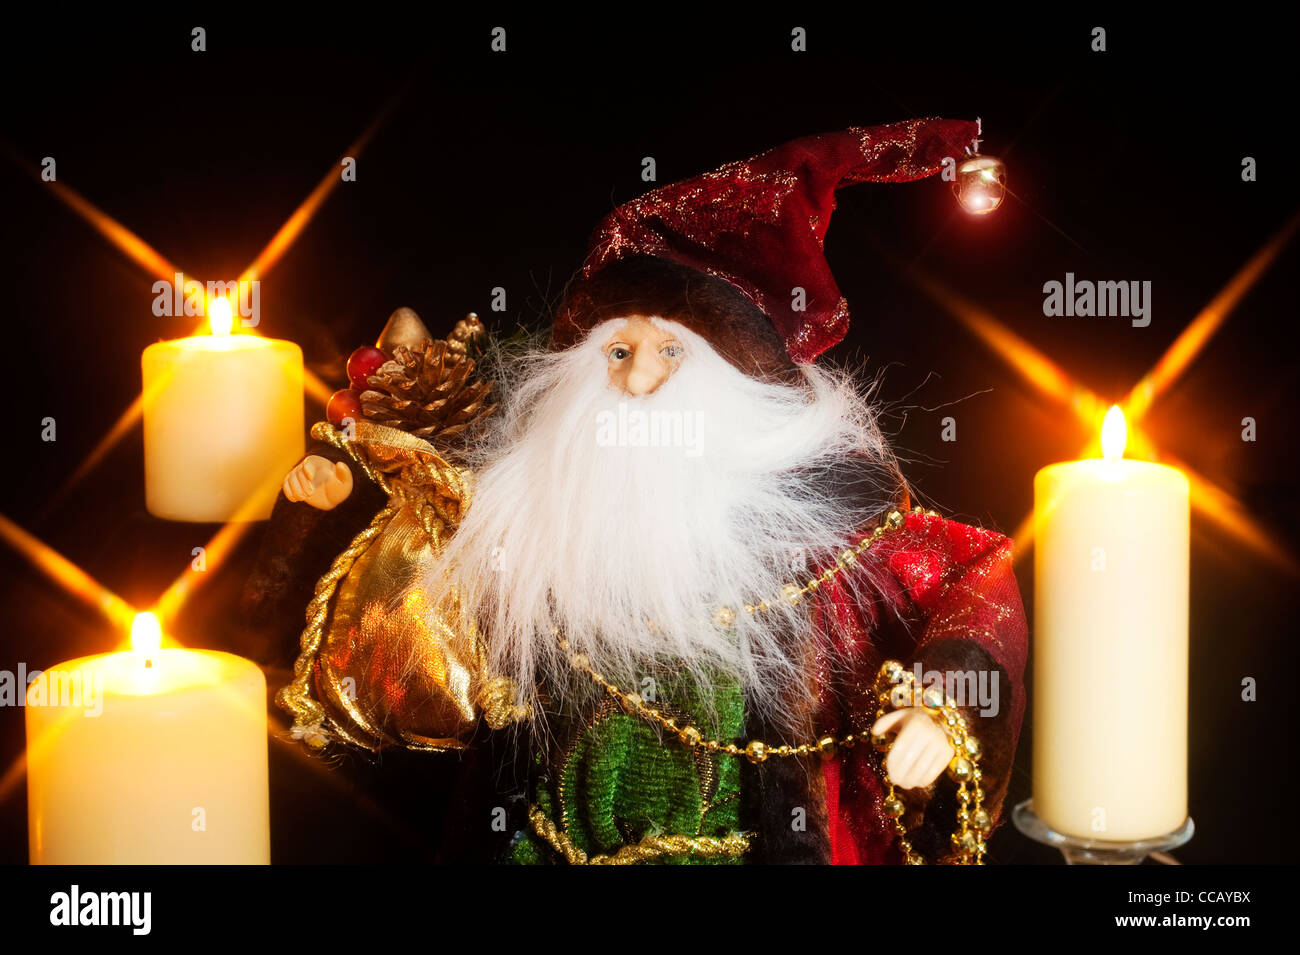 A Santa Claus figure with a big white beard with candles Stock Photo